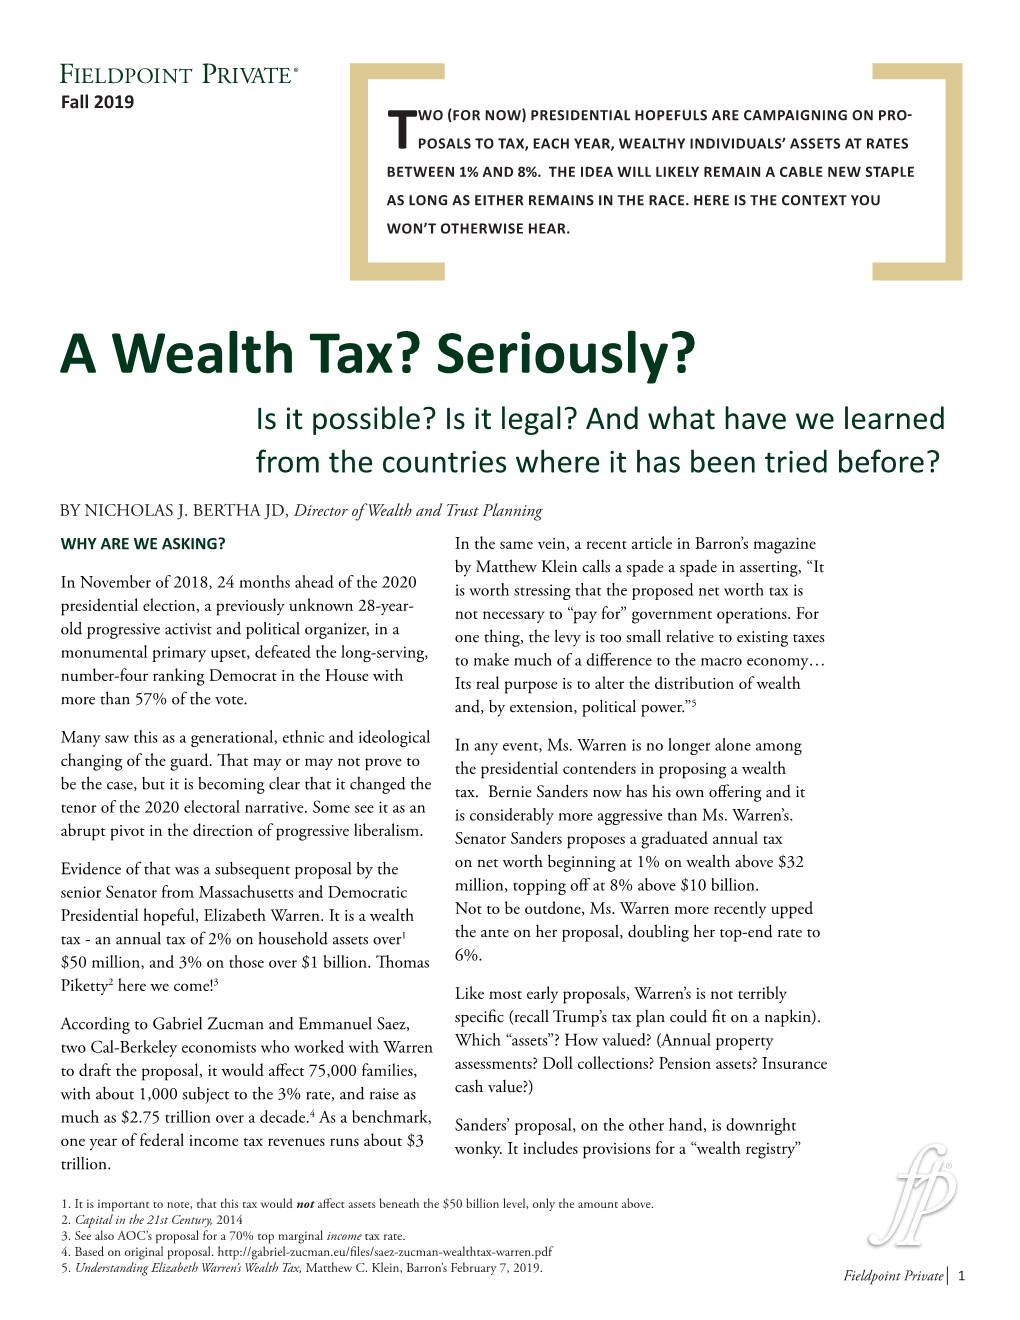 A Wealth Tax? Seriously? Is It Possible? Is It Legal? and What Have We Learned from the Countries Where It Has Been Tried Before?